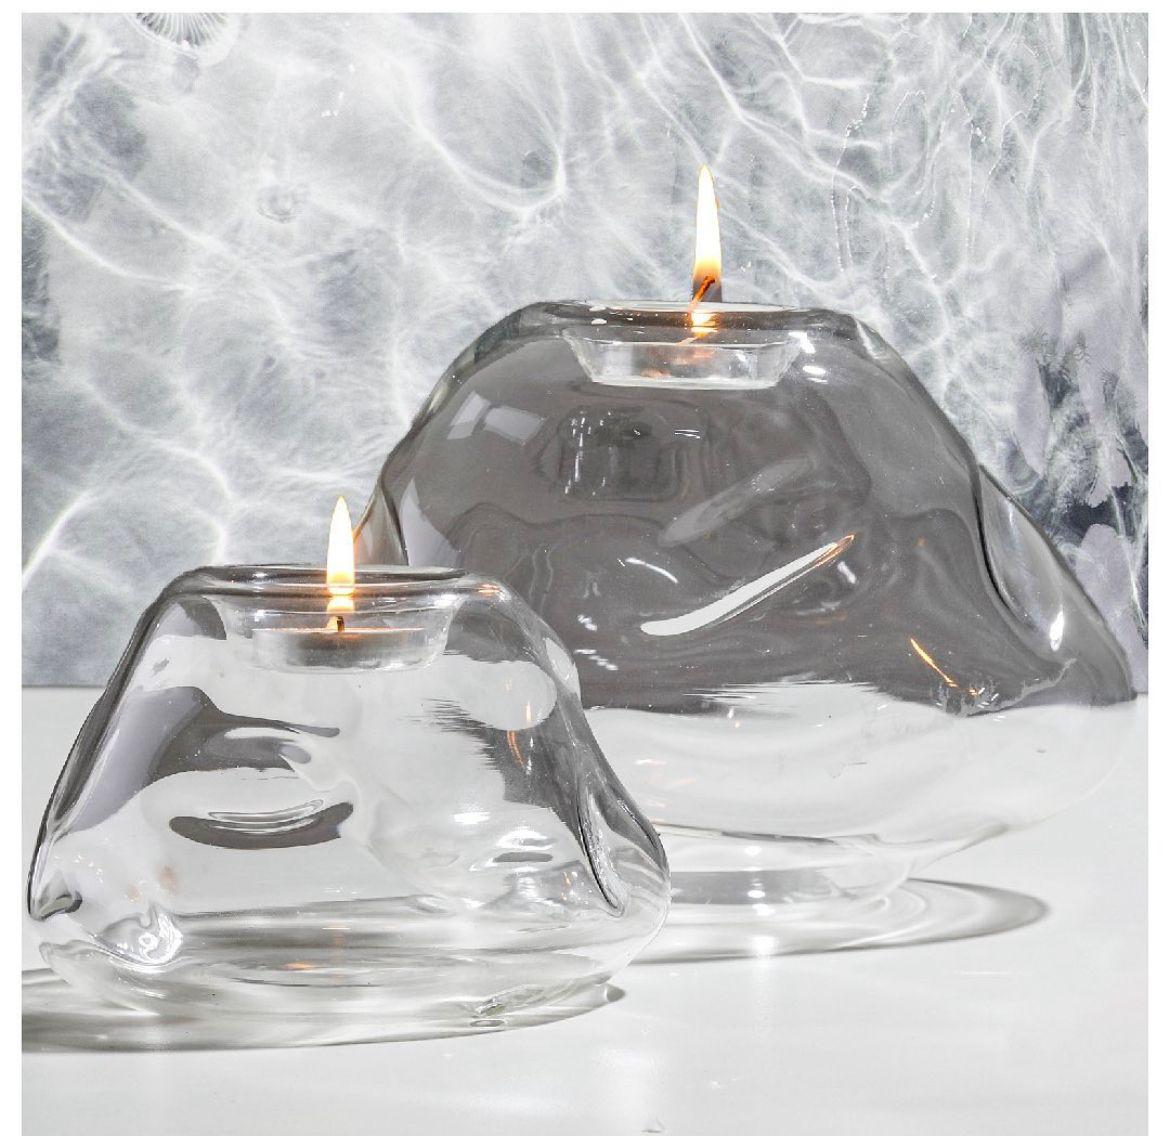 Pebble tea lights are sculptural blown glass votives inspired by small stones one finds next to a flowing stream near the mountains.

These set of two pebble tea light holders, inspired by winding mountain roads add understated minimal elegance to